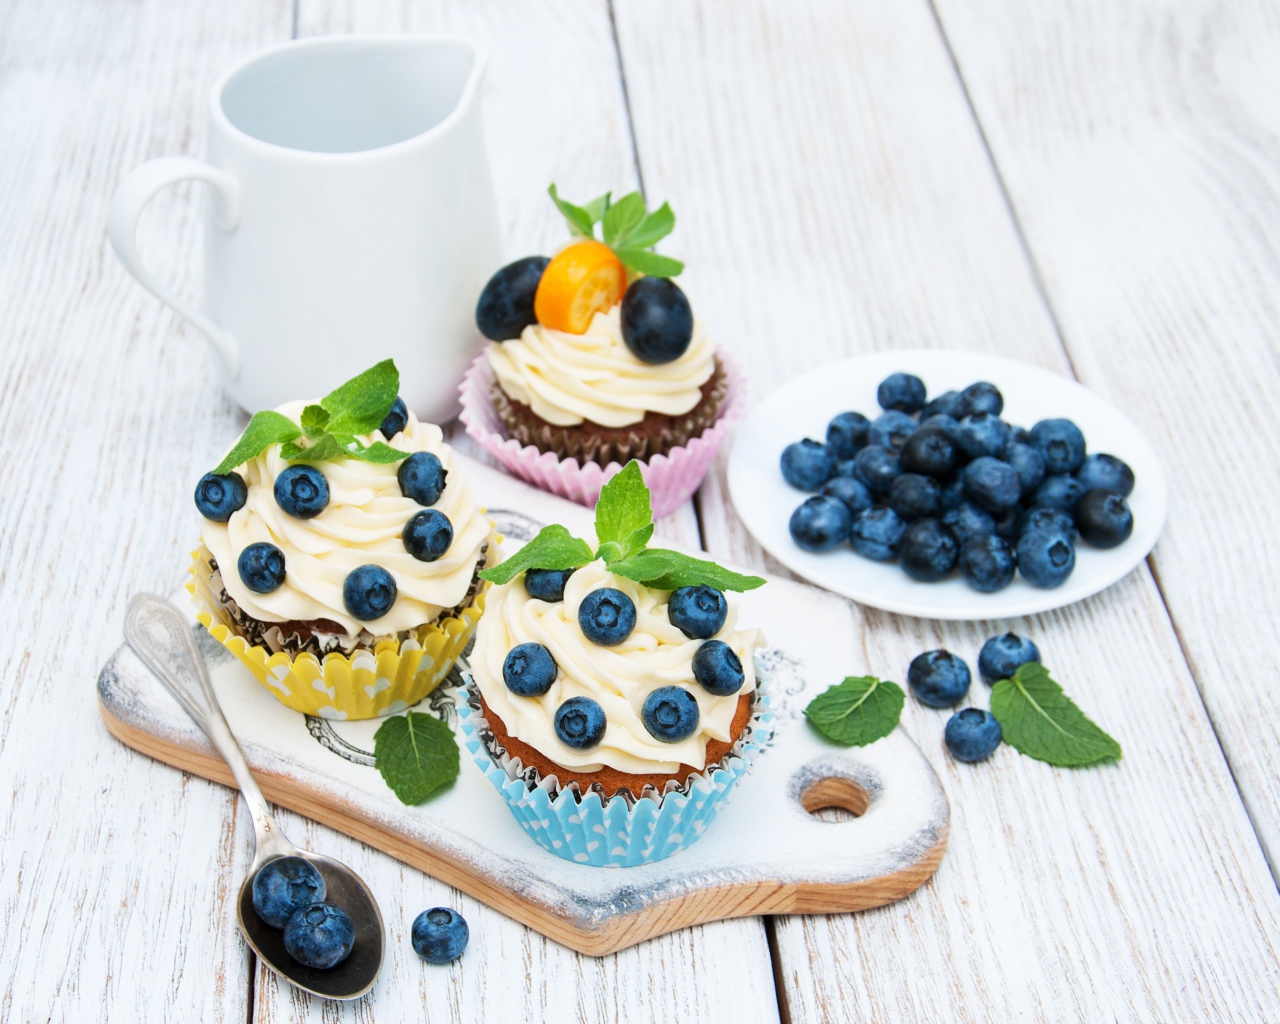 Muffins on a table with blueberries